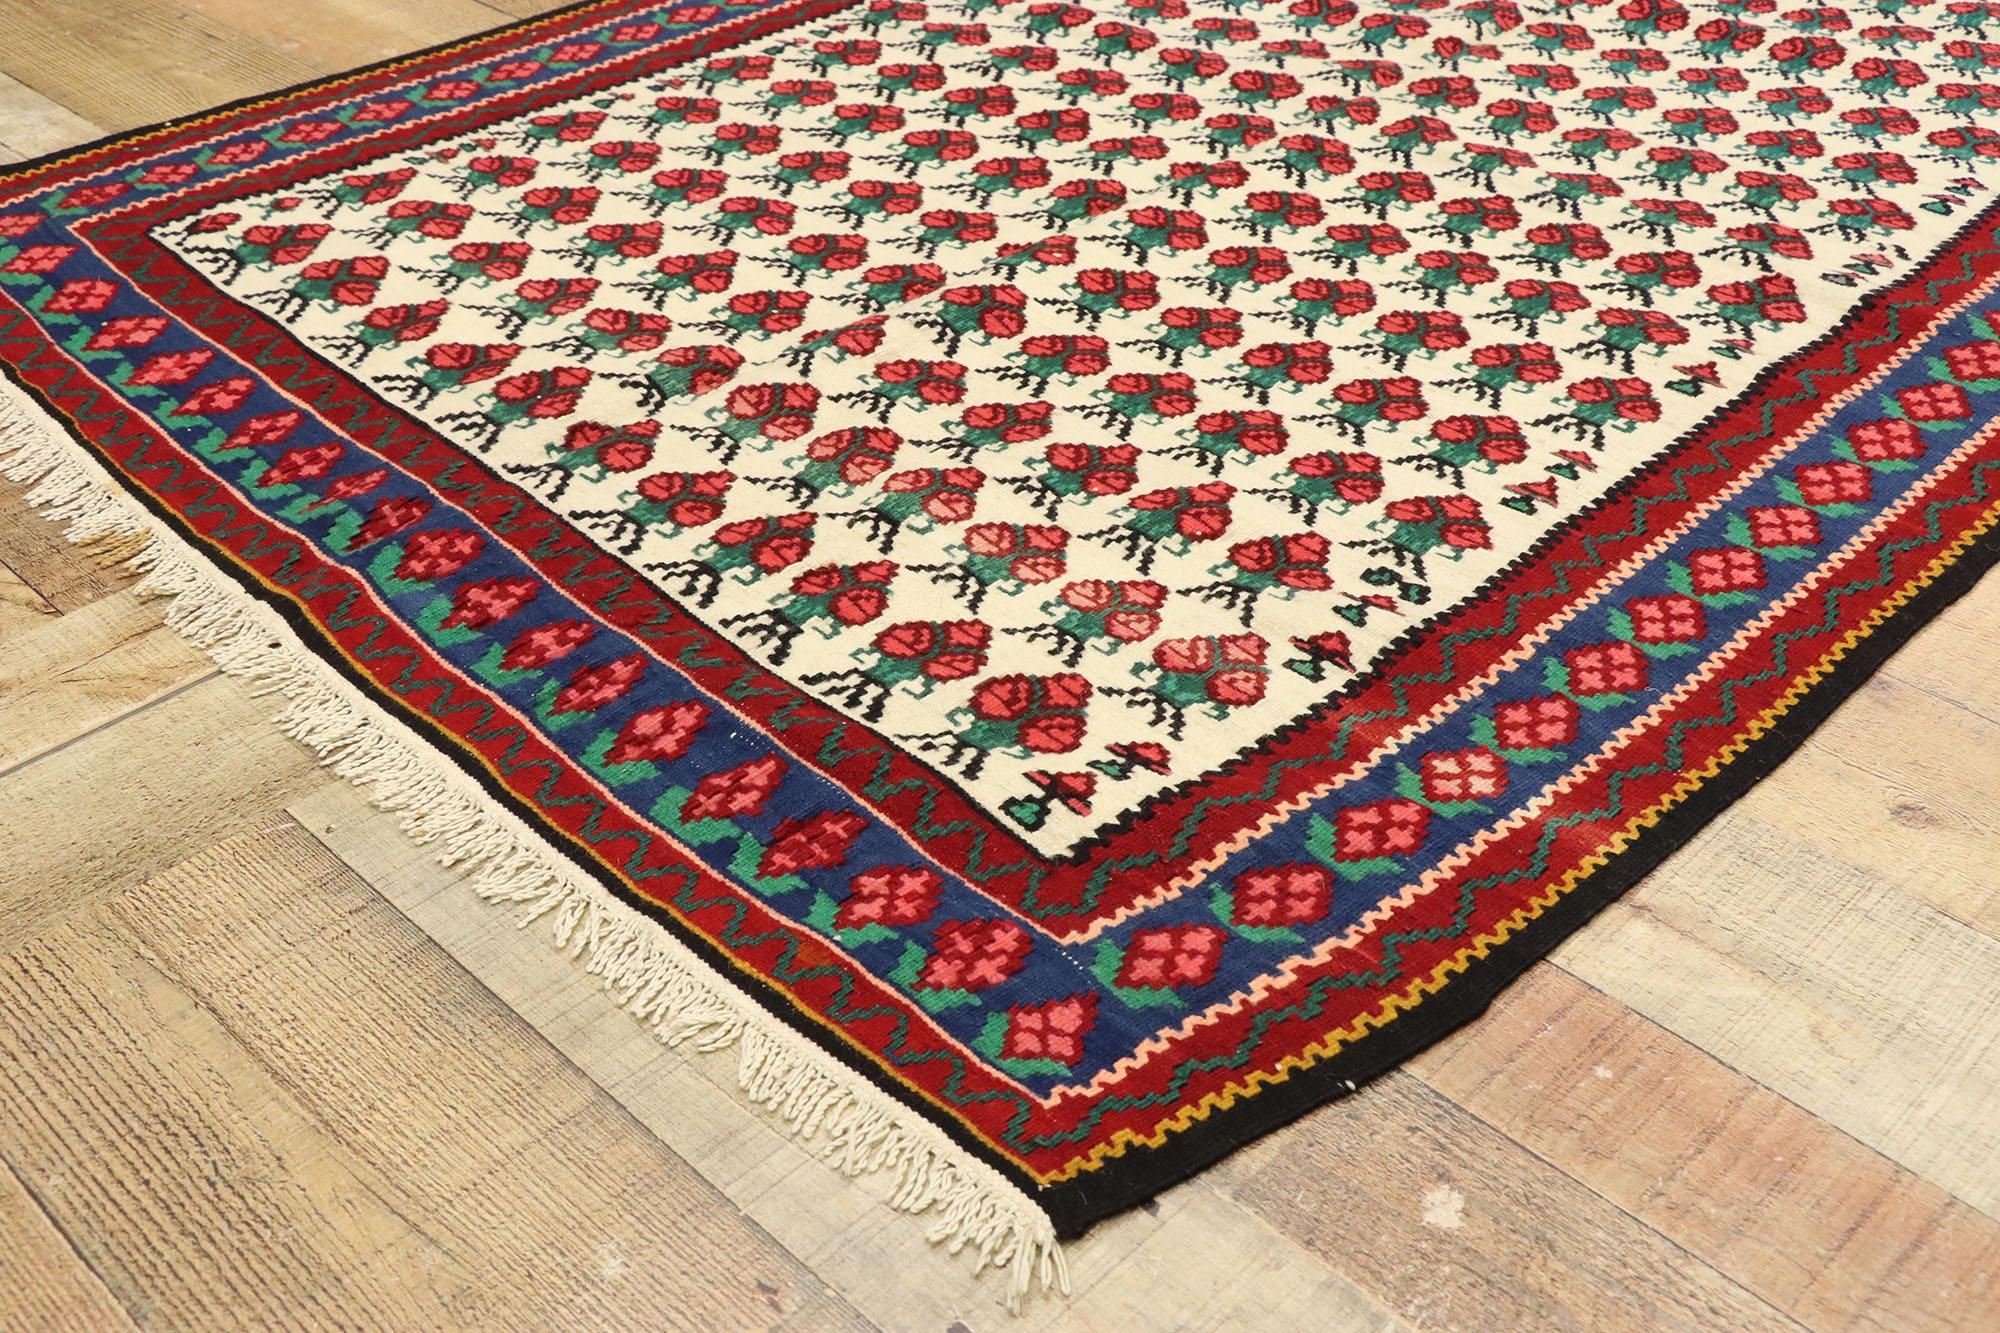 Hand-Woven Vintage Floral Persian Kilim Rug with Americana Style For Sale